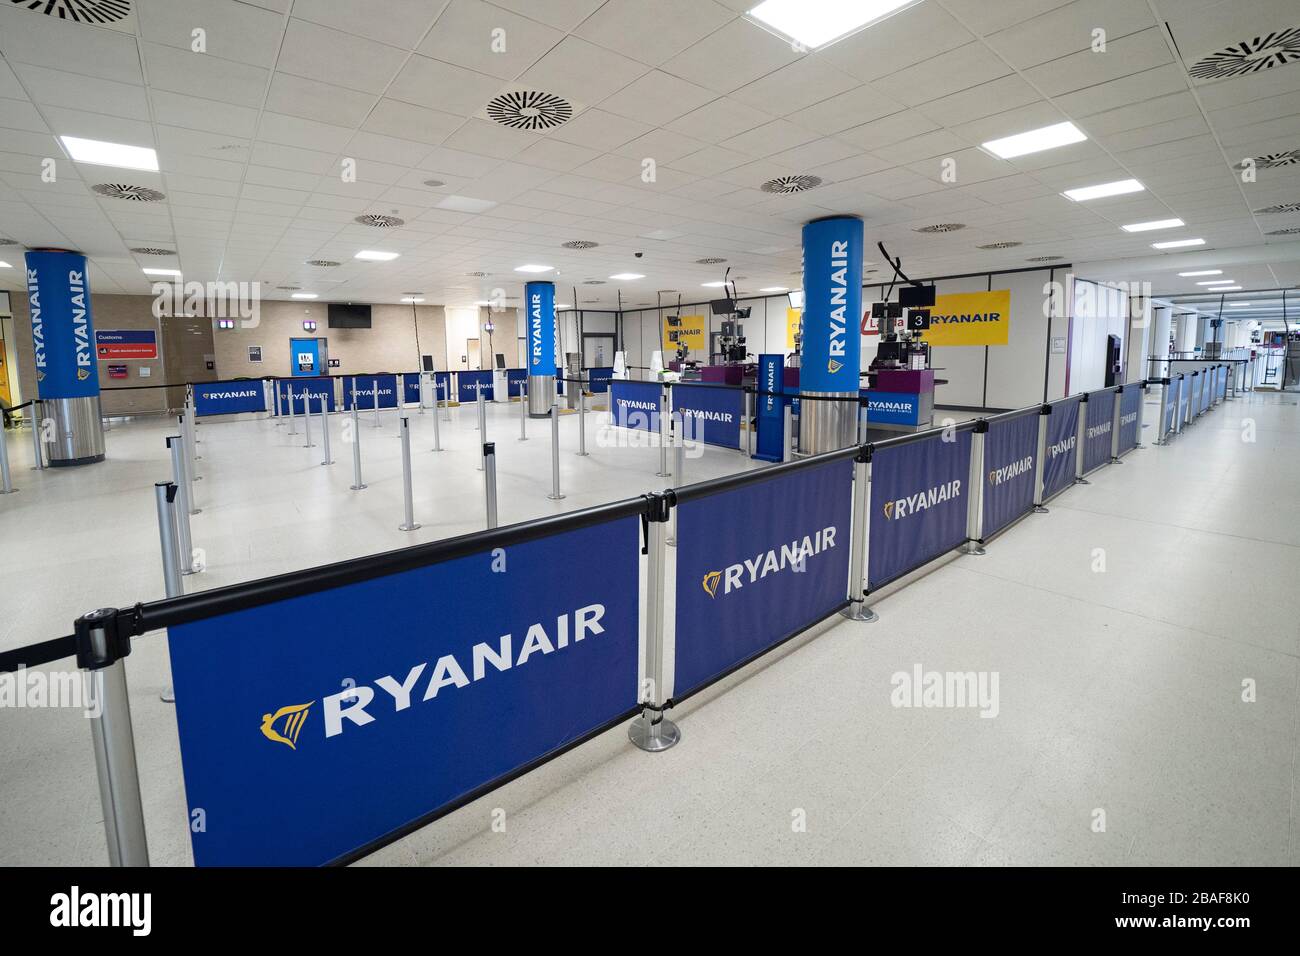 Edinburgh, Scotland, UK. 27 March, 2020. Interior views of a deserted Edinburgh Airport during the coronavirus pandemic. With very few flights during the current Covid-19 crisis passengers are scarce in the terminal building. Nobody at a closed Ryanair check-in area. Iain Masterton/Alamy Live News Stock Photo